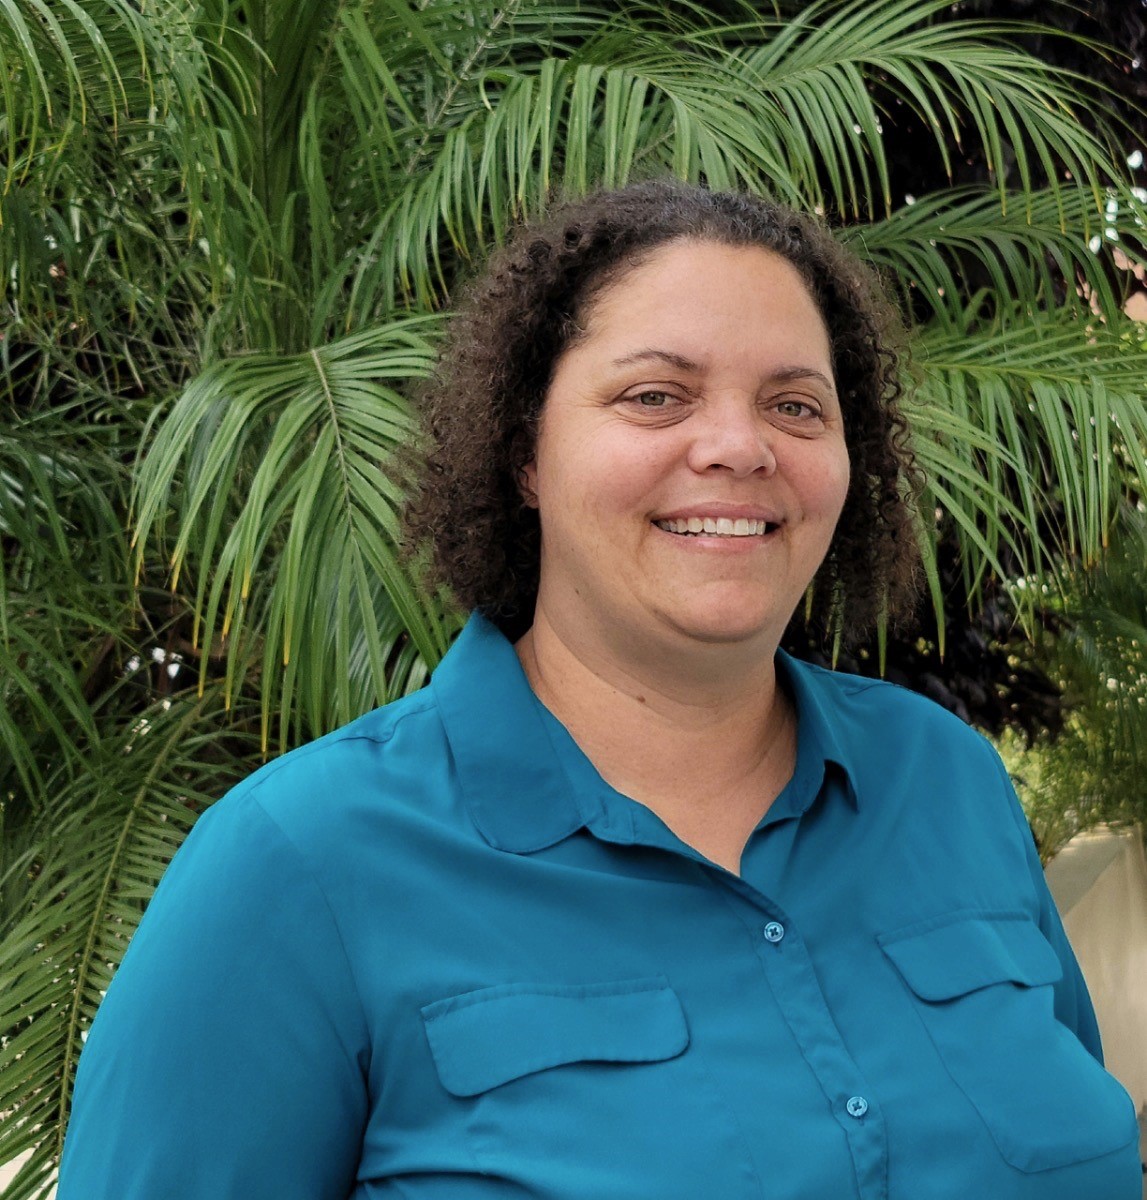 This image contains a brown curly haired person with tan olive skin and hazel eyes standing in front of a  palm tree wearing a teal button up blouse with 2 front pockets smiling while looking at the camera. 